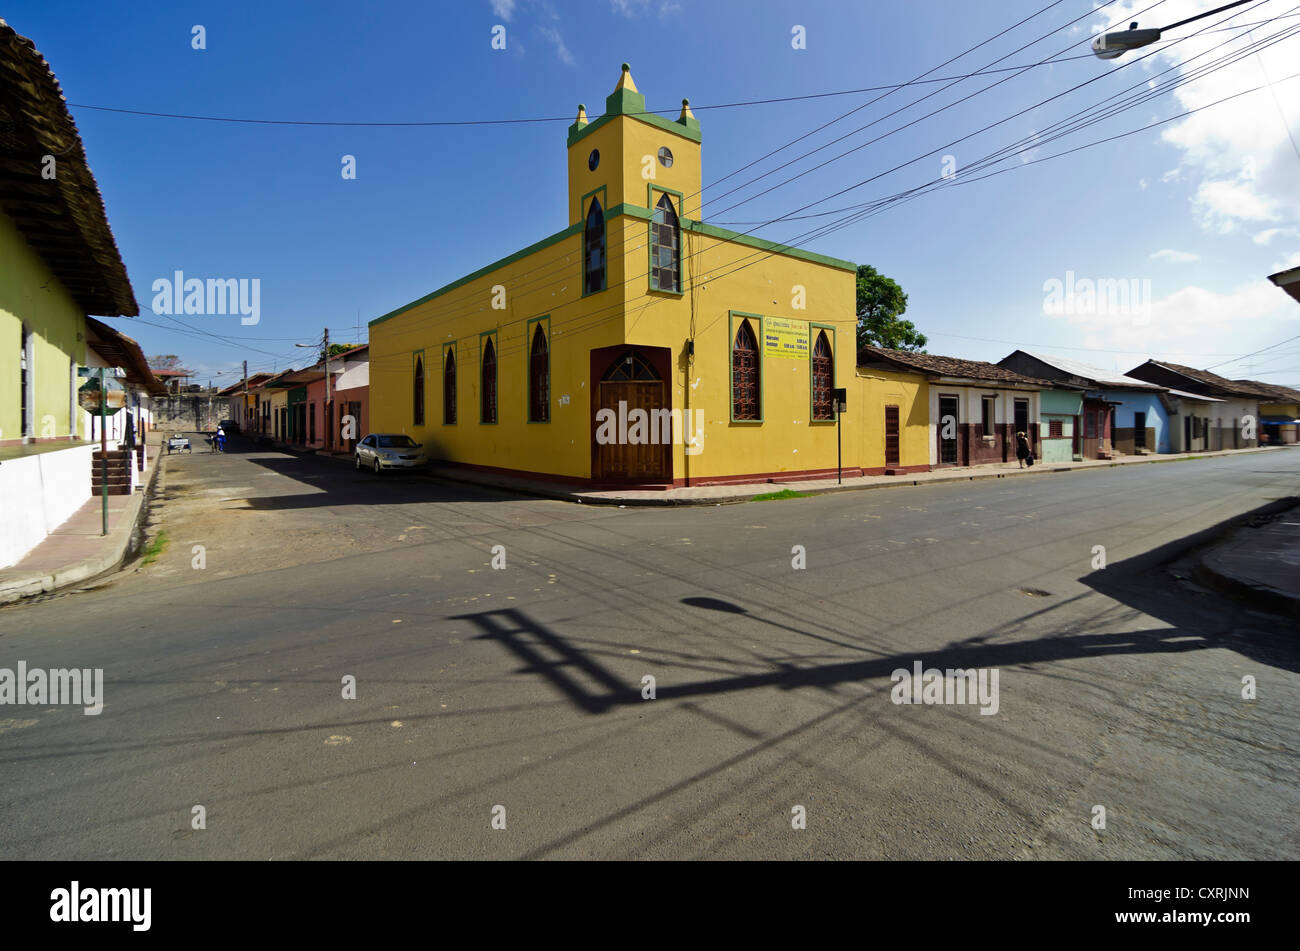 A road junction and Cristiana Jesus es mi paz church in Granada, founded in 1524, Nicaragua, Central America Stock Photo